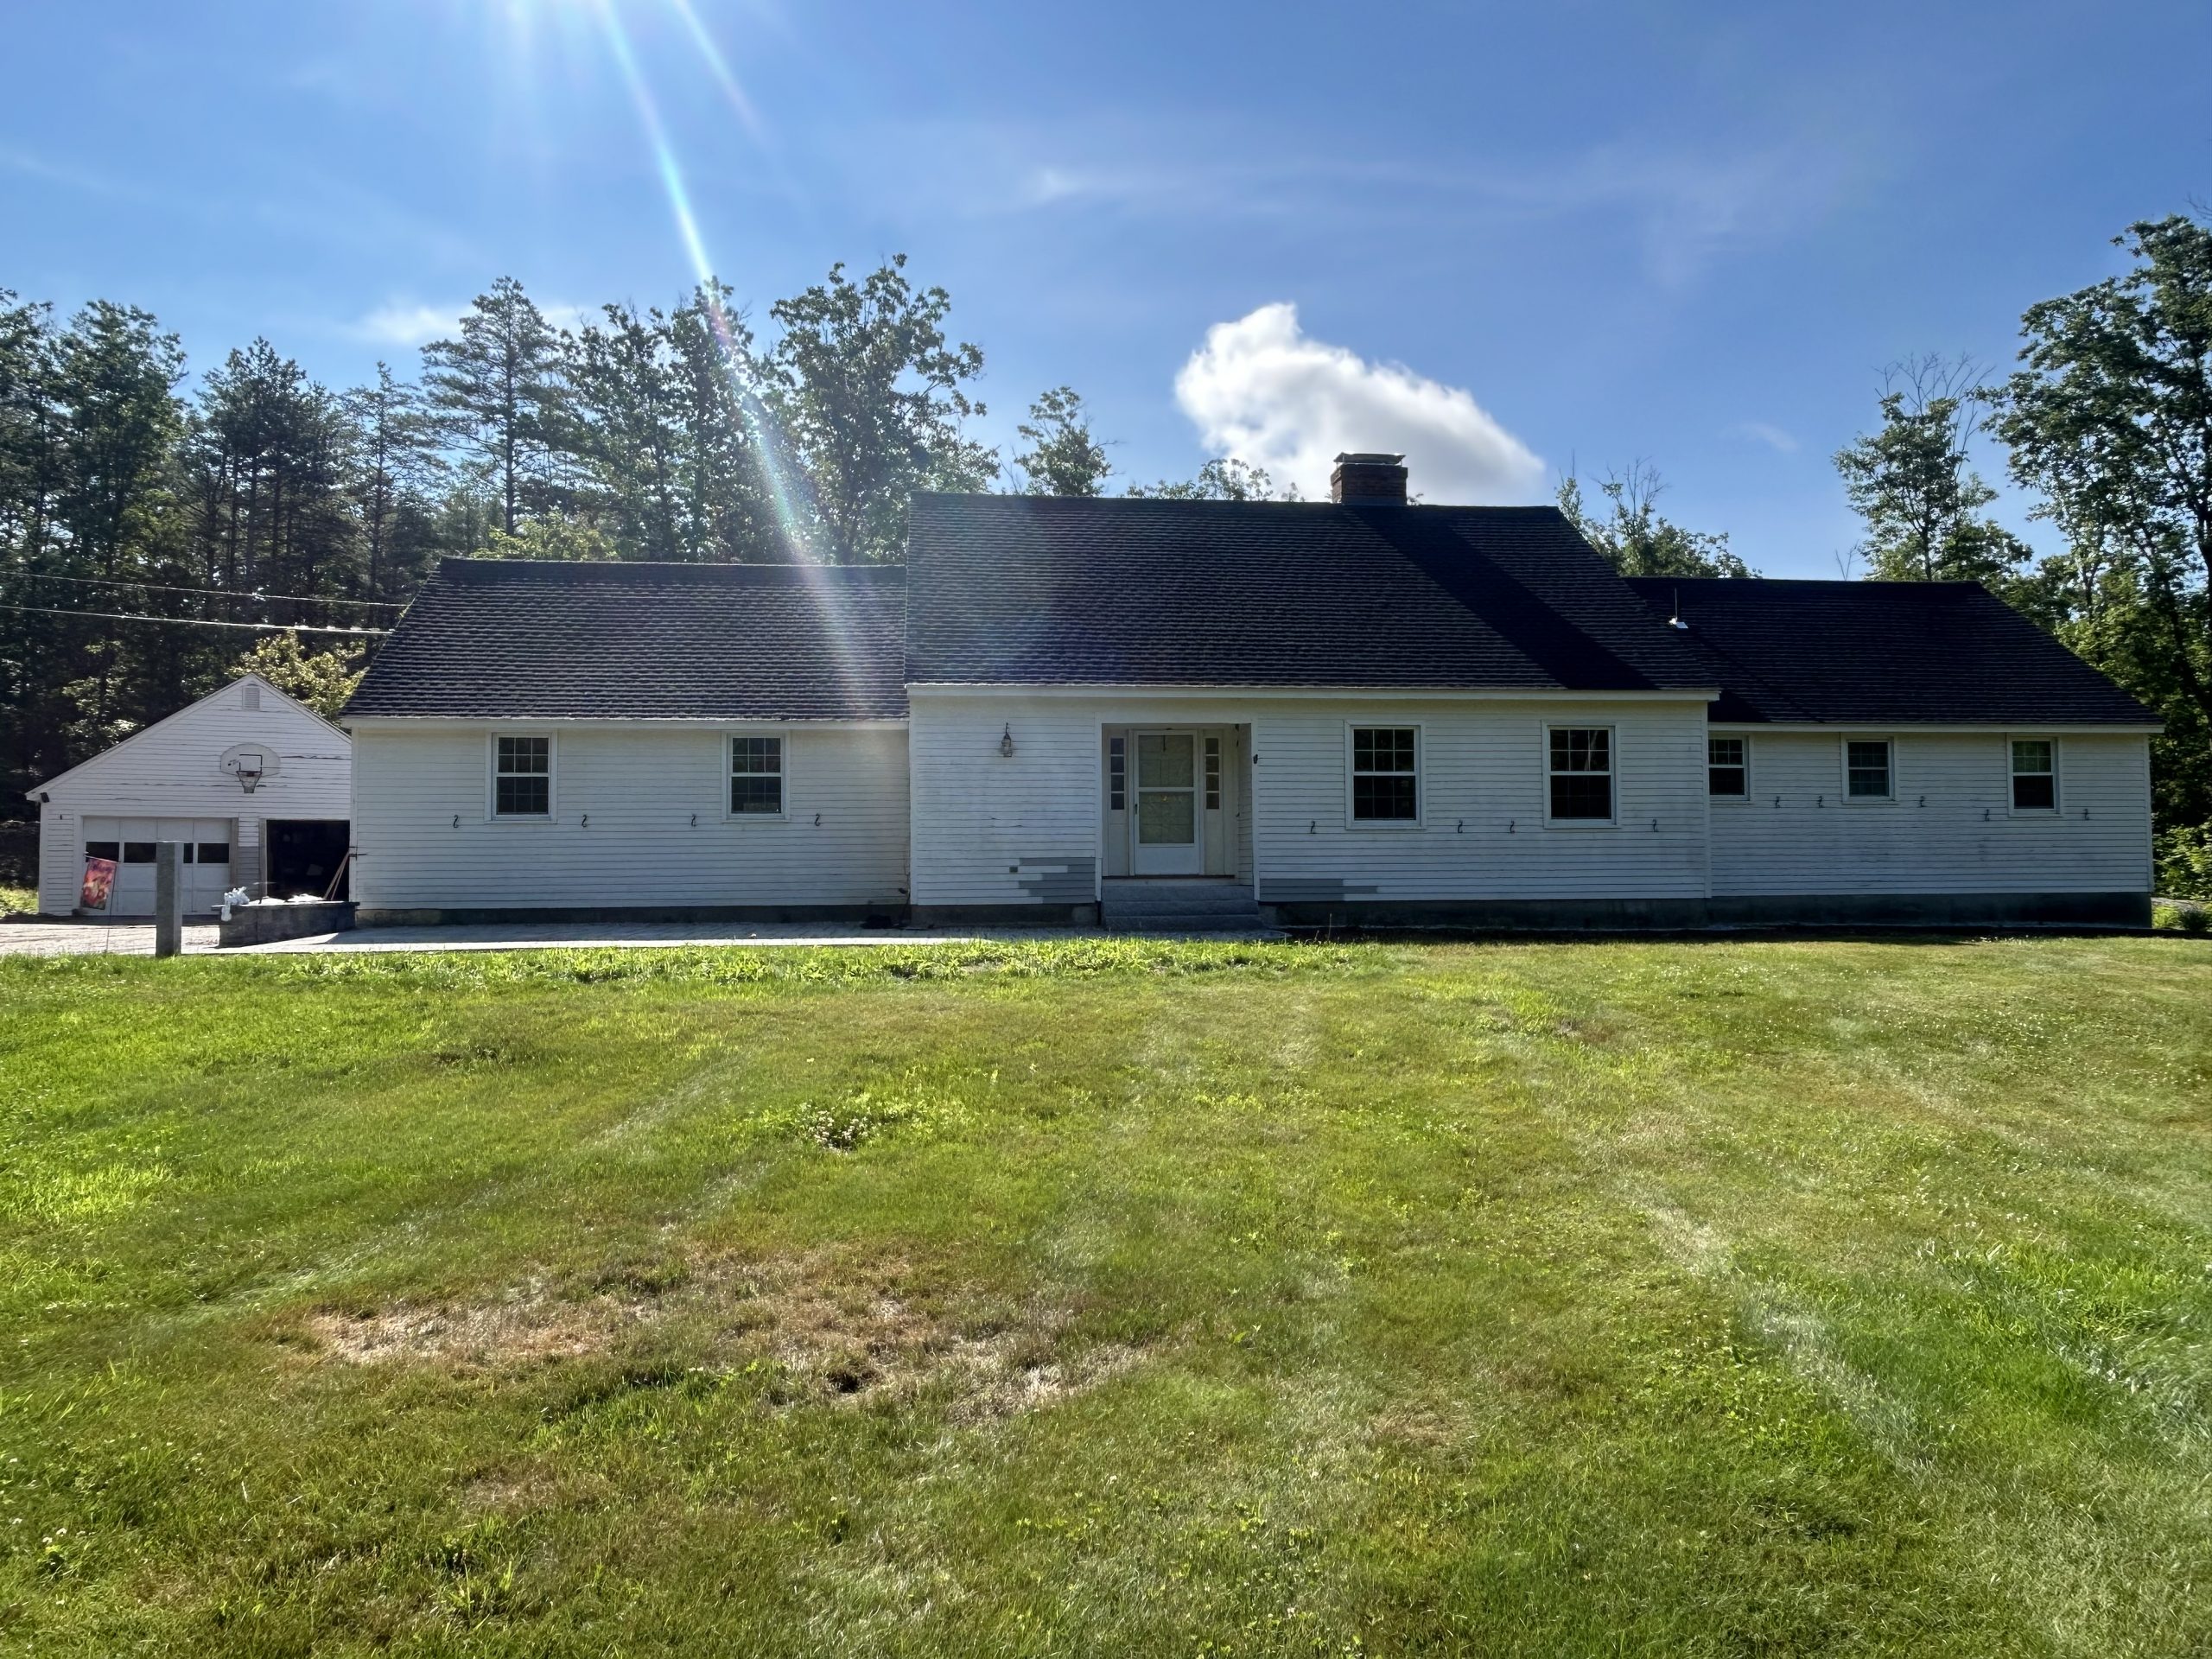 Home in Francestown, NH Before